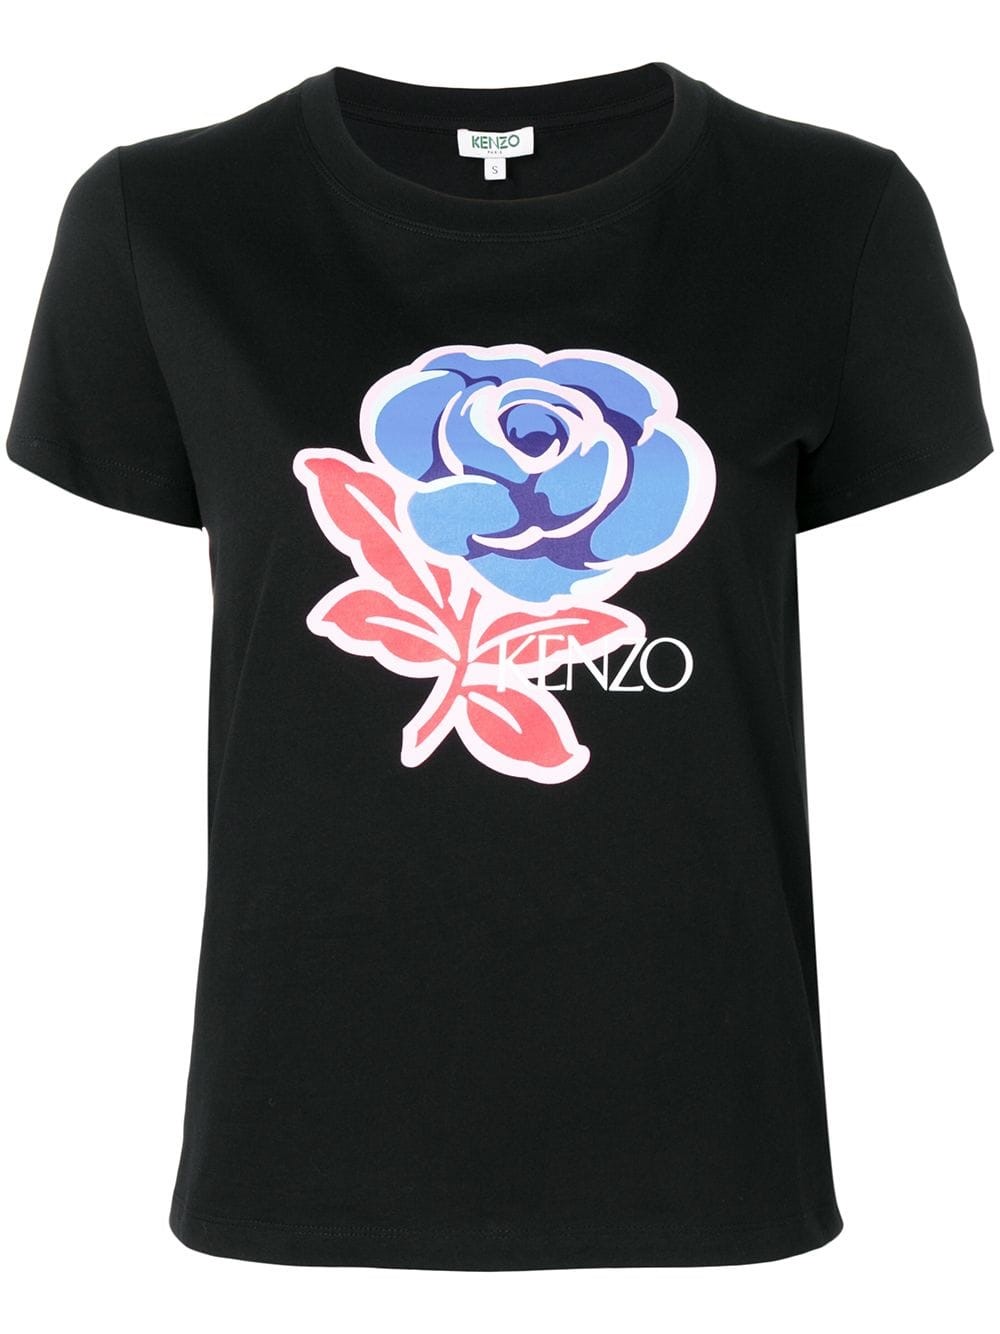 kenzo ROSE T-SHIRT available on 